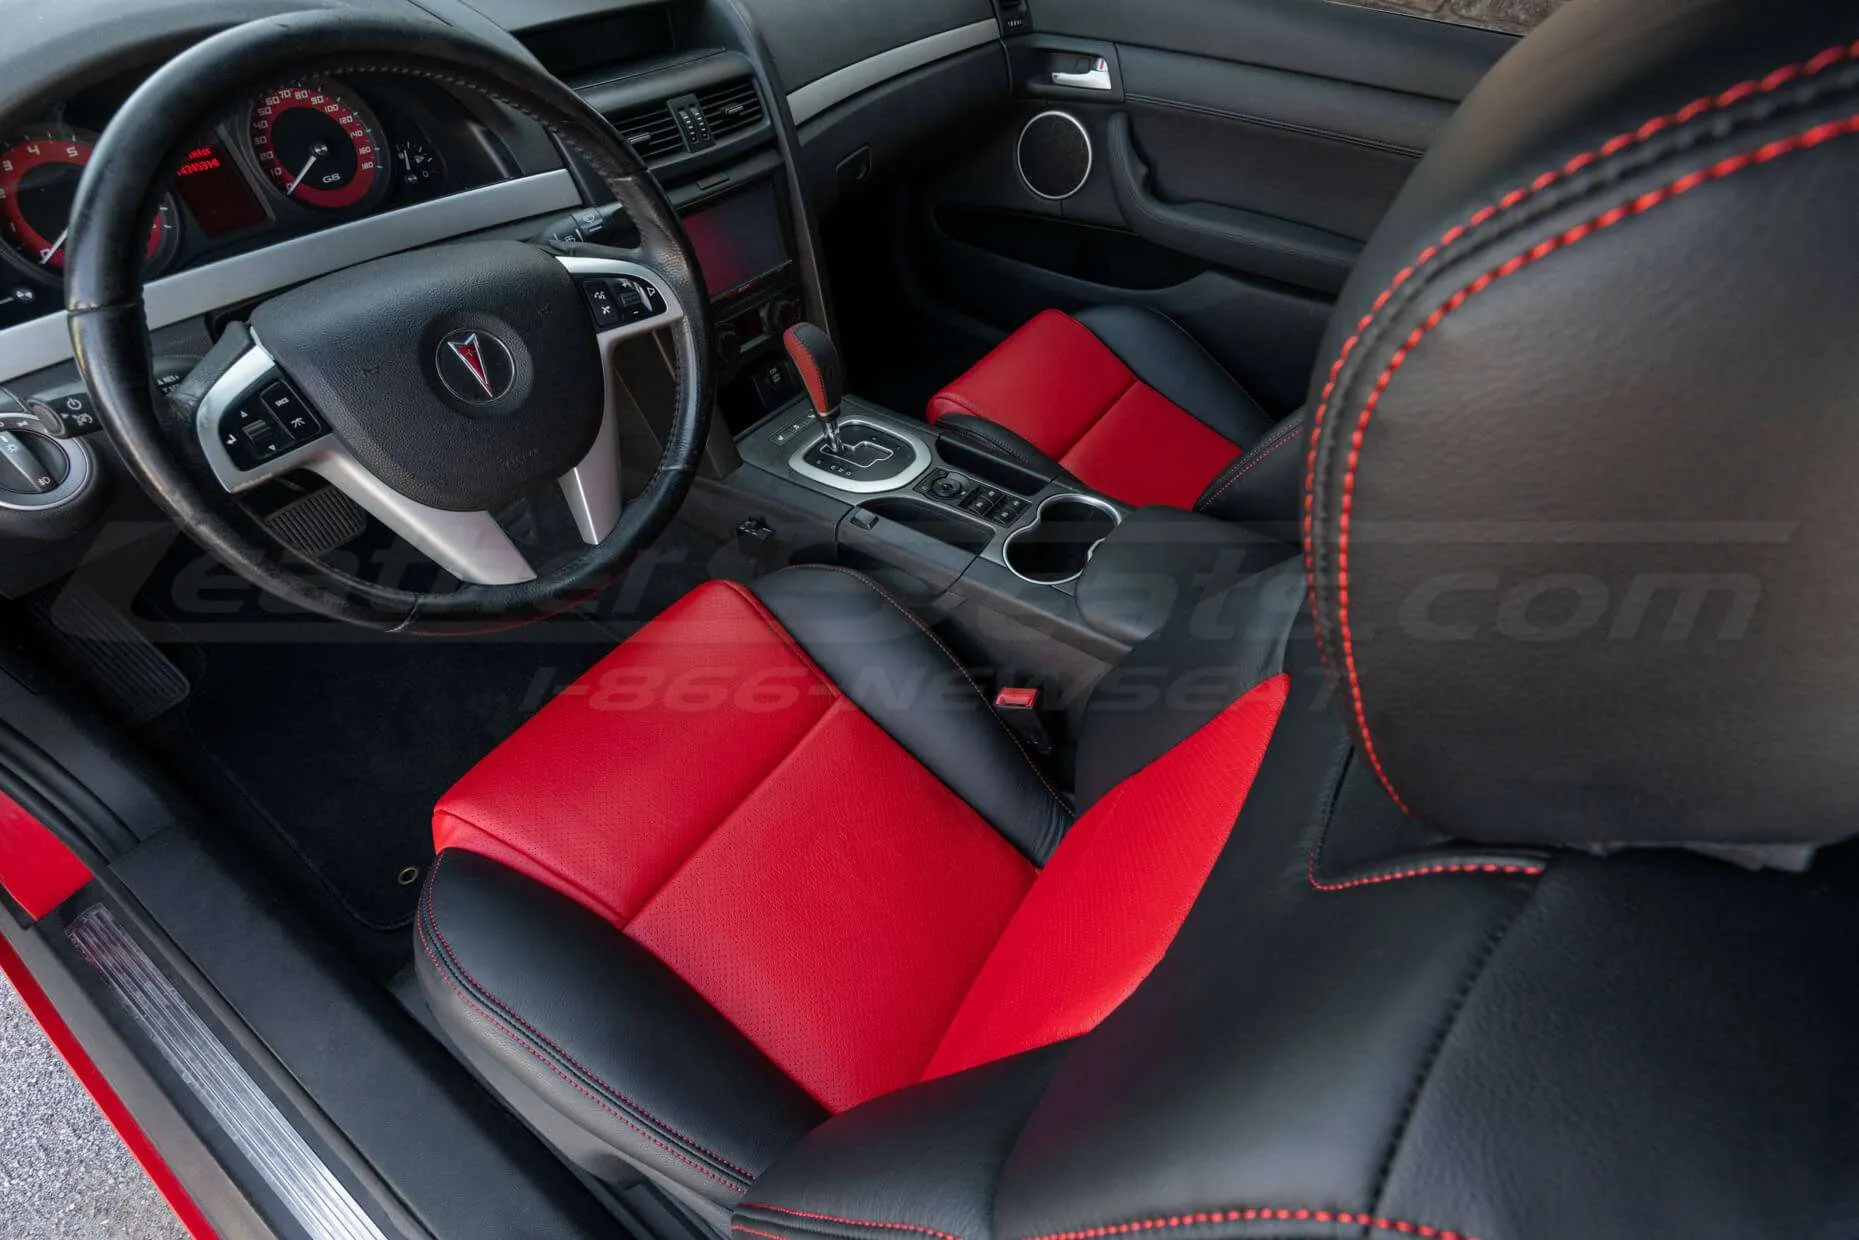 Top-down view of front driver seat with installed two-tone black and bright red upholstery